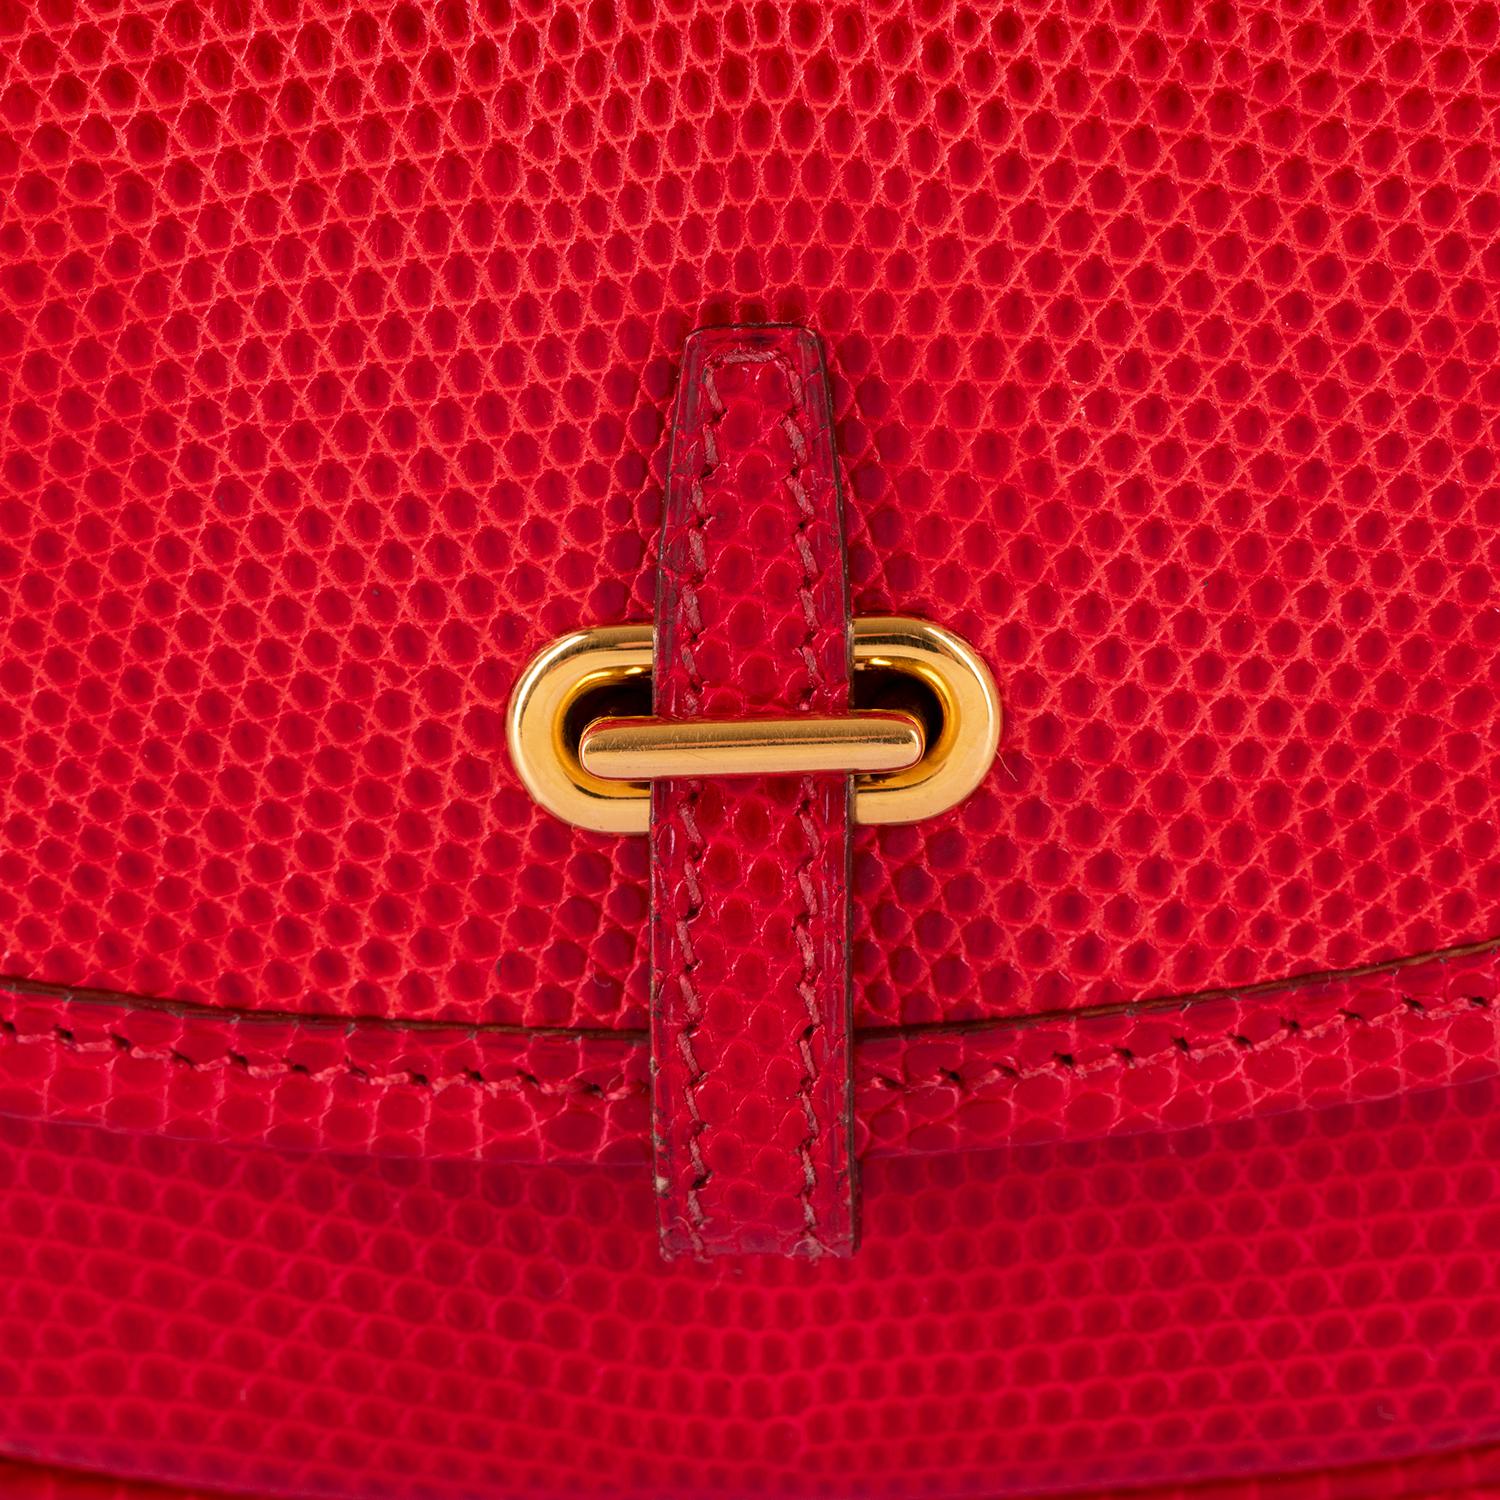 Red Hermes 'Rouge Vif' Shiny LizardMini Evening Bag with Gold hardware - Very Rare For Sale